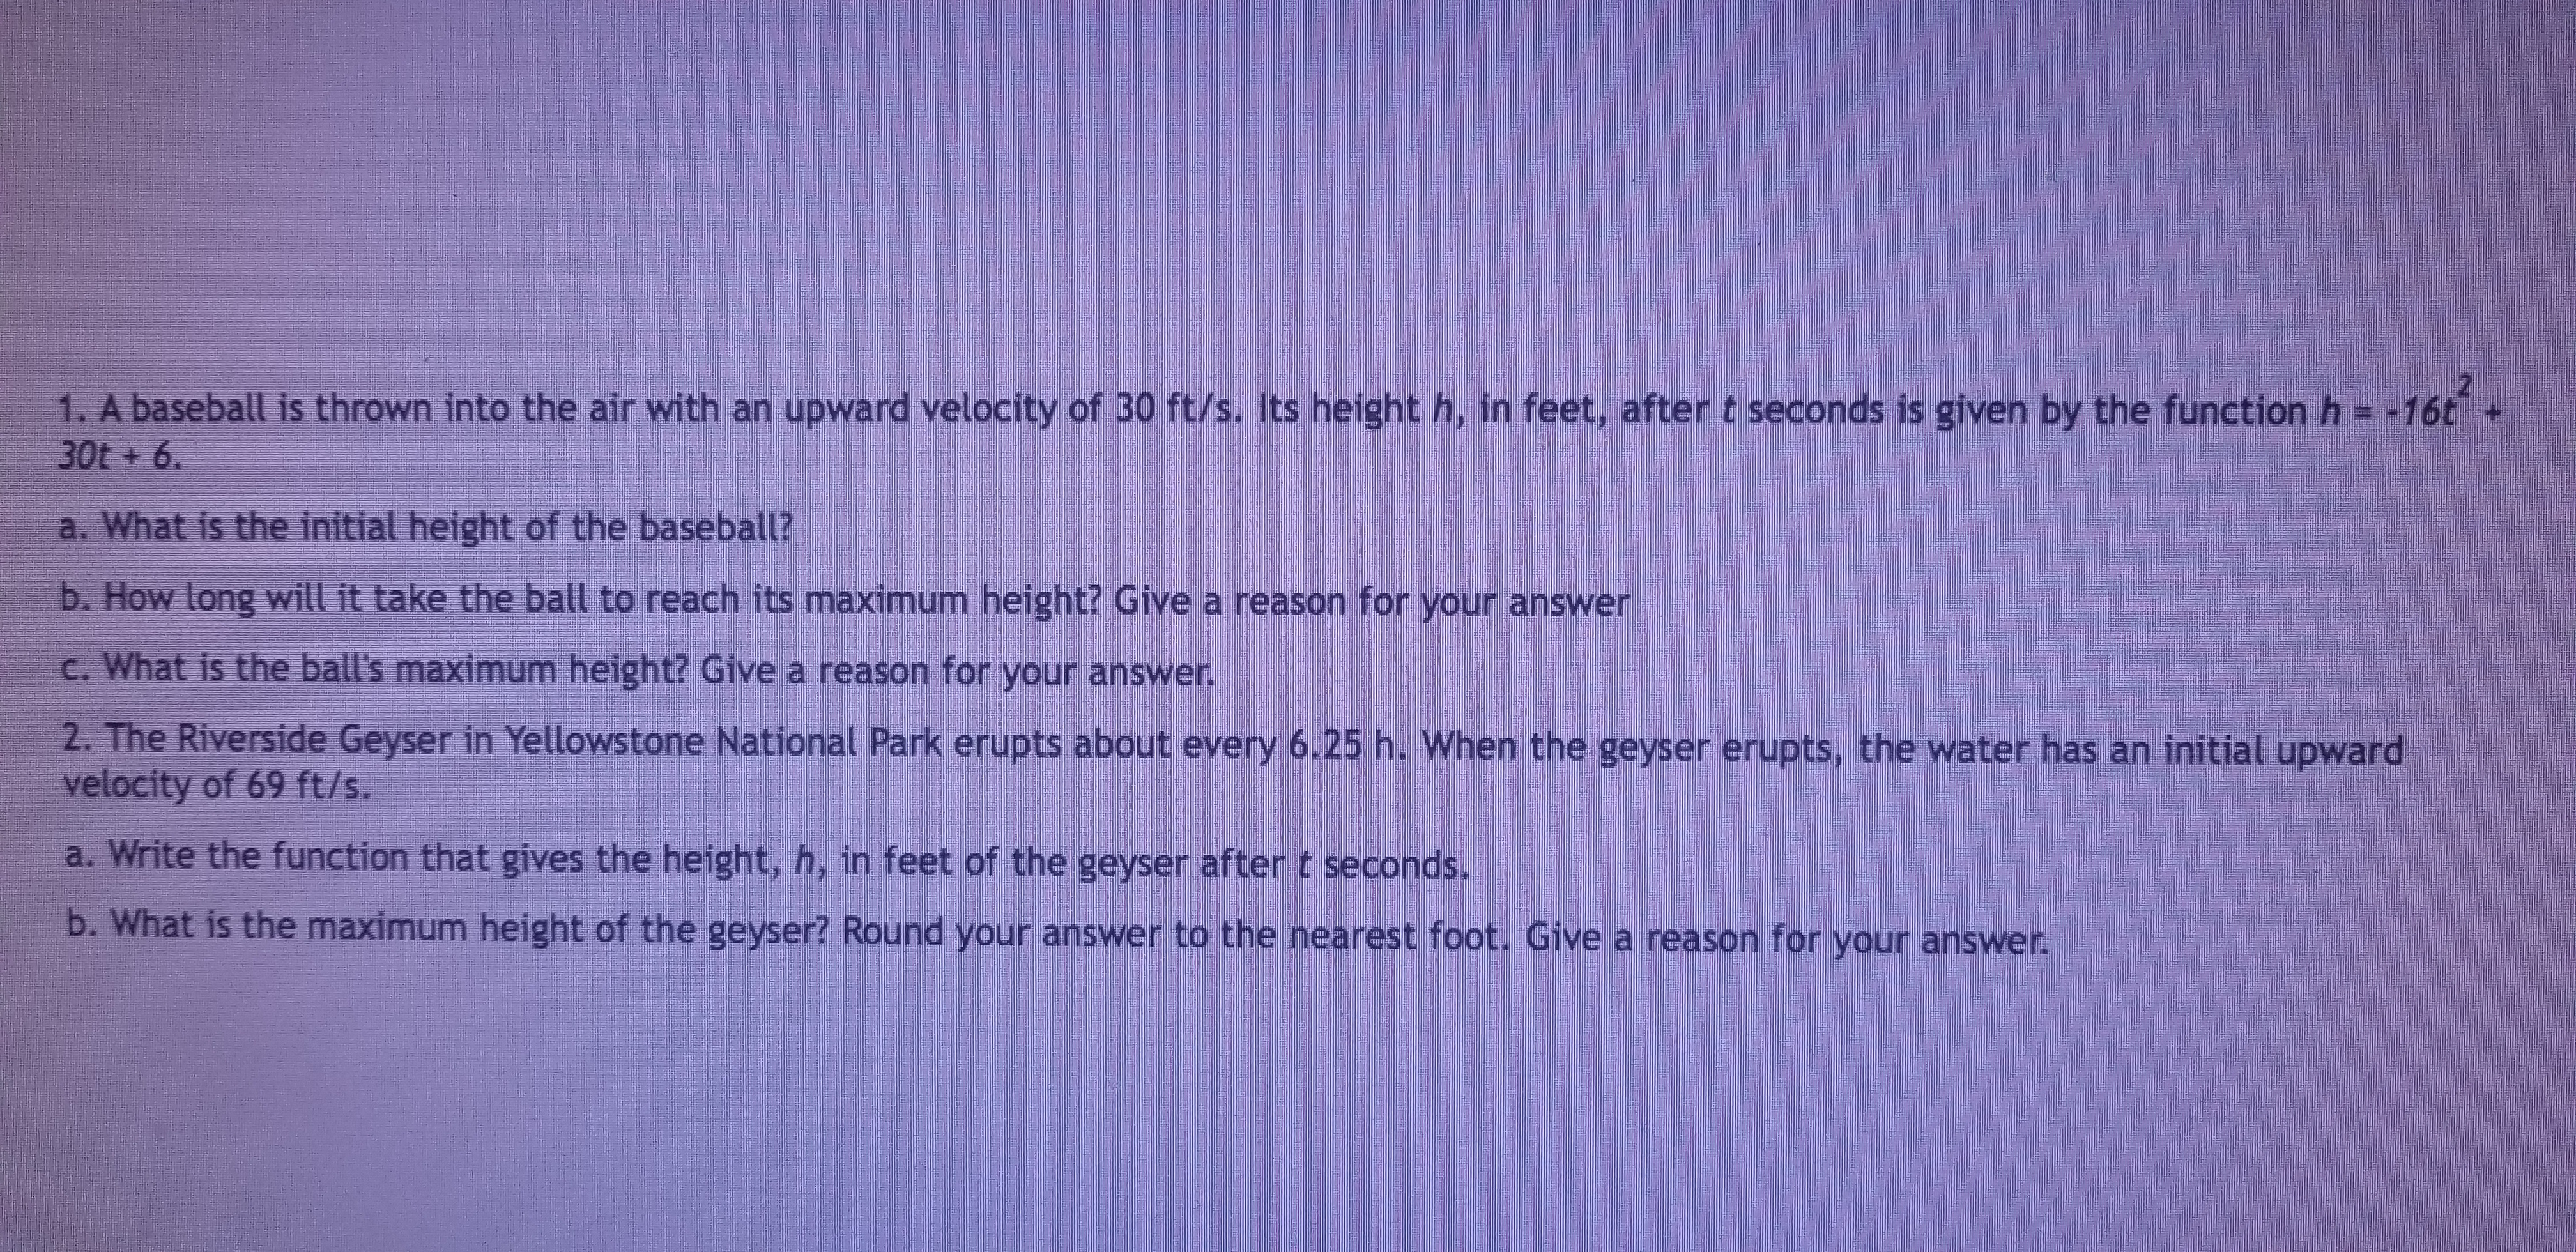 1. A baseball is thrown into the air with an upward velocity of 30 ft/s. Its height h, in feet, after t seconds is given by the function h16t
30t+ 6.
a. What is the initial height of the baseball?
b. How long will it take the ball to reach its maximum height? Give a reason for your answer
c. What is the ball's maximum height? Give a reason for your answer
2. The Riverside Geyser in Yellowstone National Park erupts about every 6.25 h. When the geyser erupts, the water has an initial upward
velocity of 69 ft/s.
a. Write the function that gives the height, h, in feet of the geyser after t seconds.
b. What is the maximum height of the geyser? Round your answer to the nearest foot. Give a reason for your answer.
